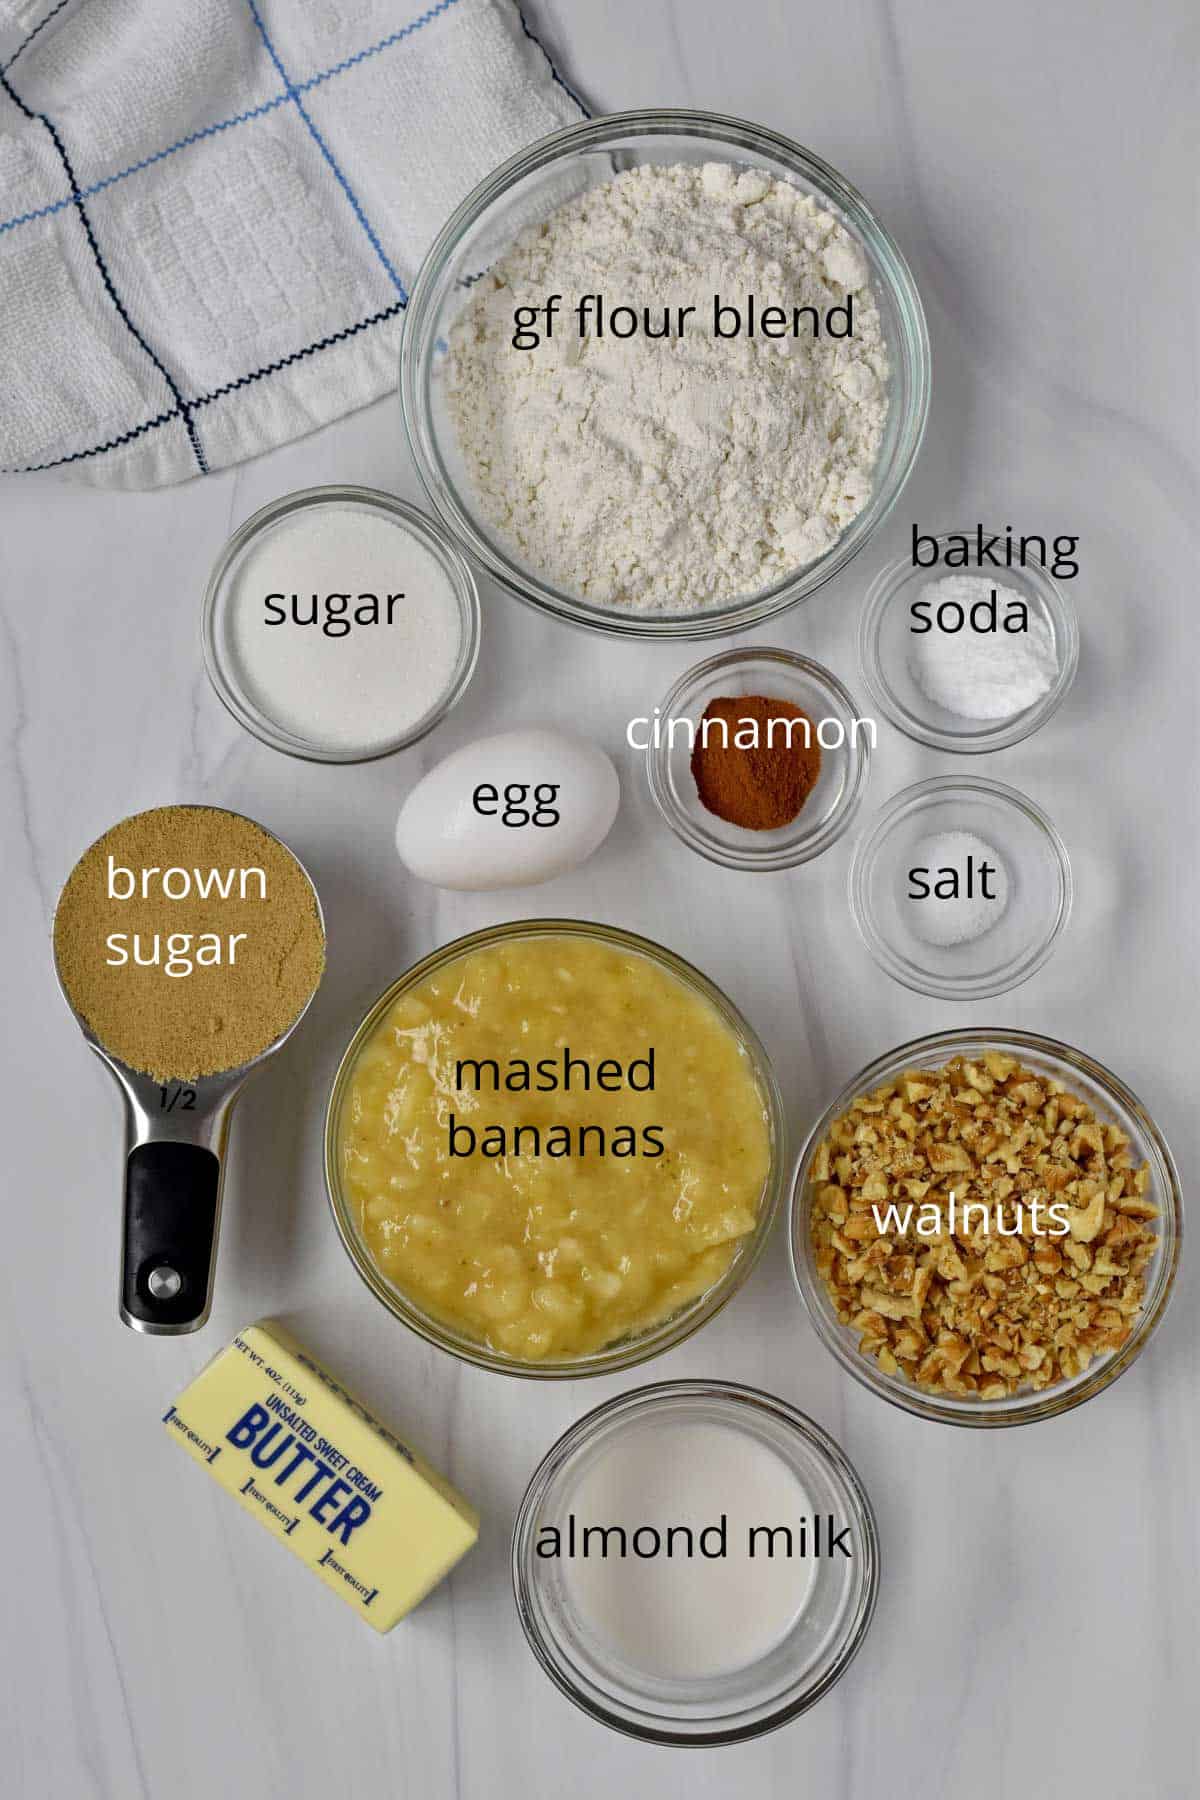 Ingredients, with labels, for gluten free banana nut muffins.